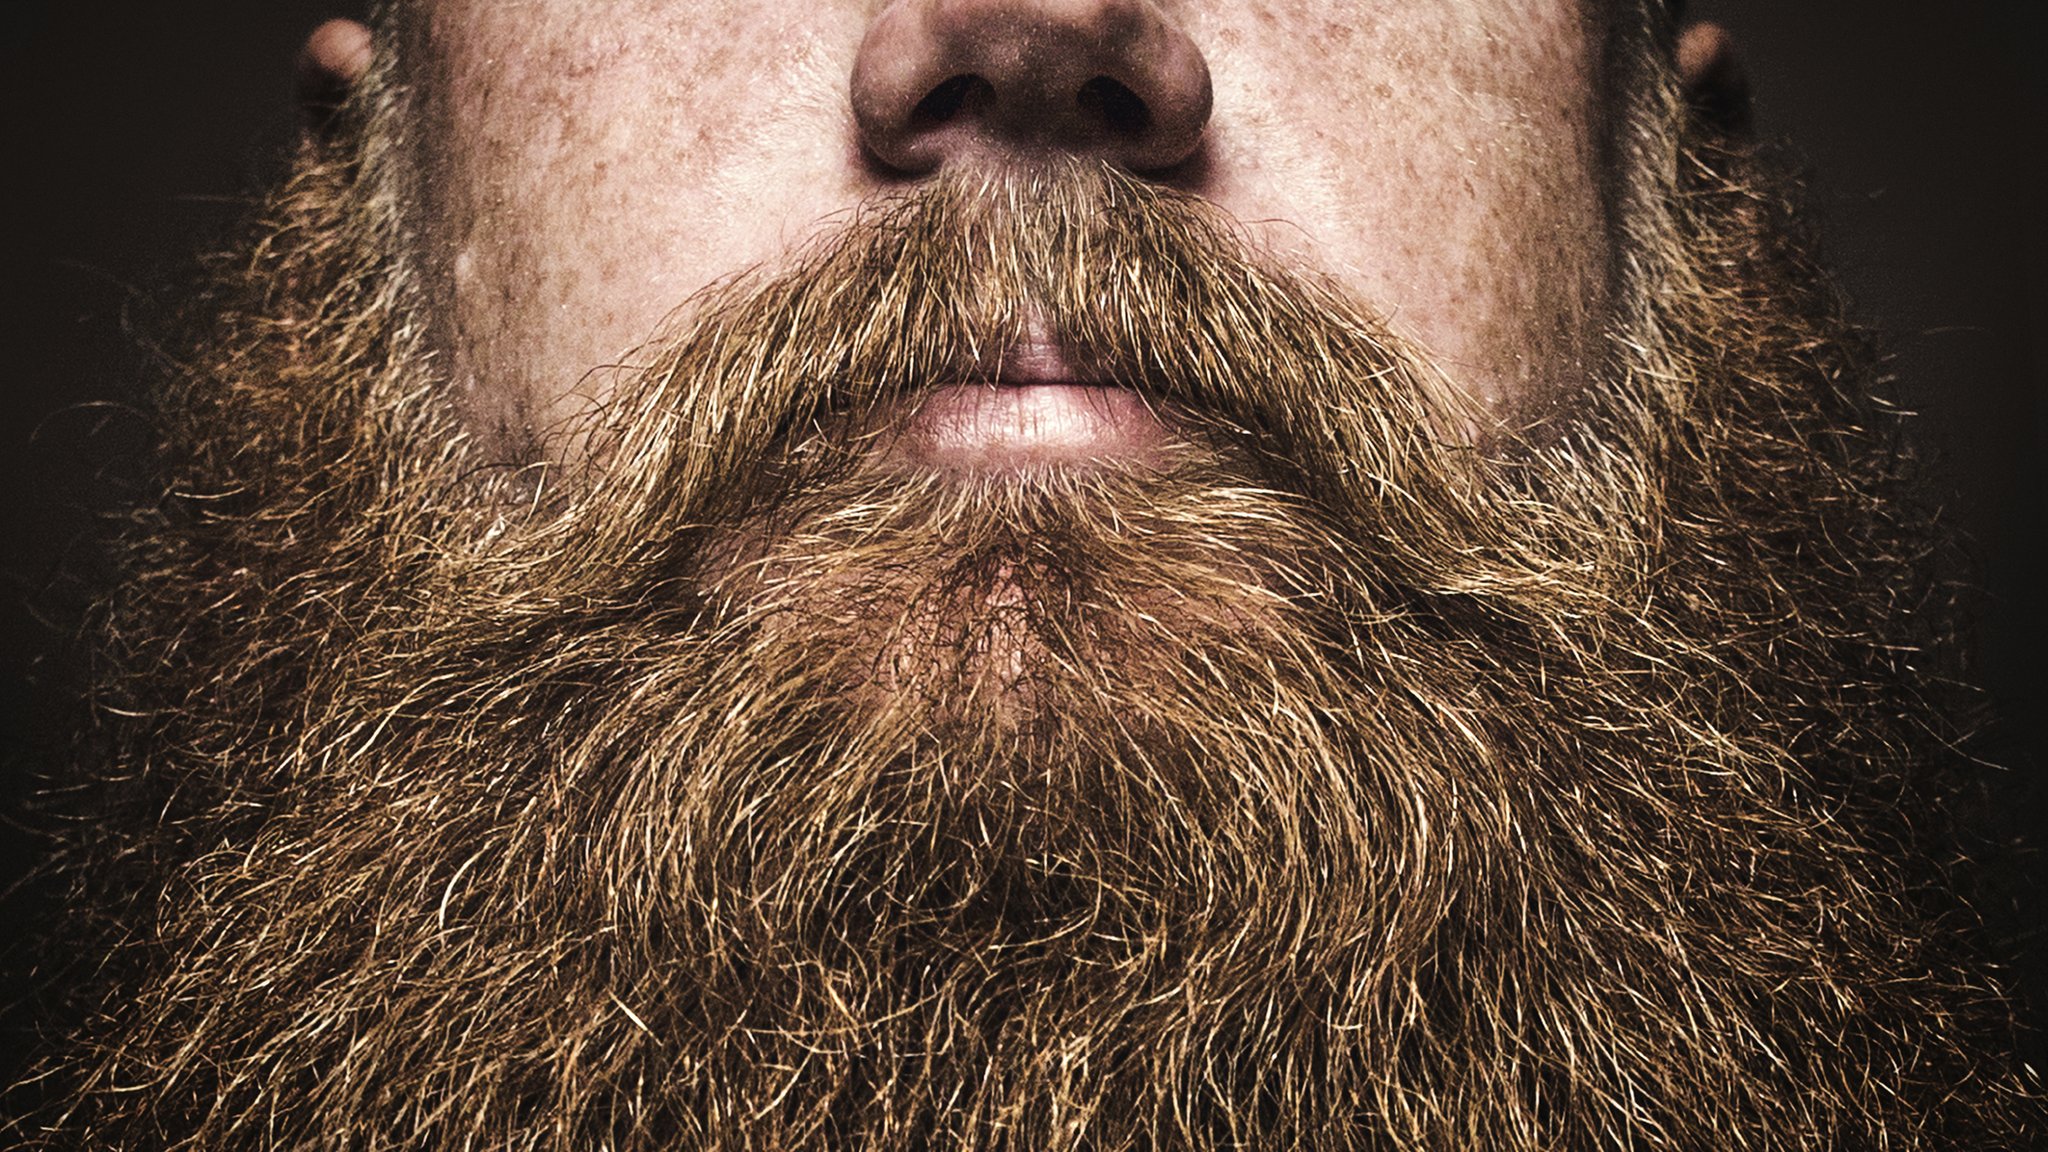 Are beards good for your health? - BBC News